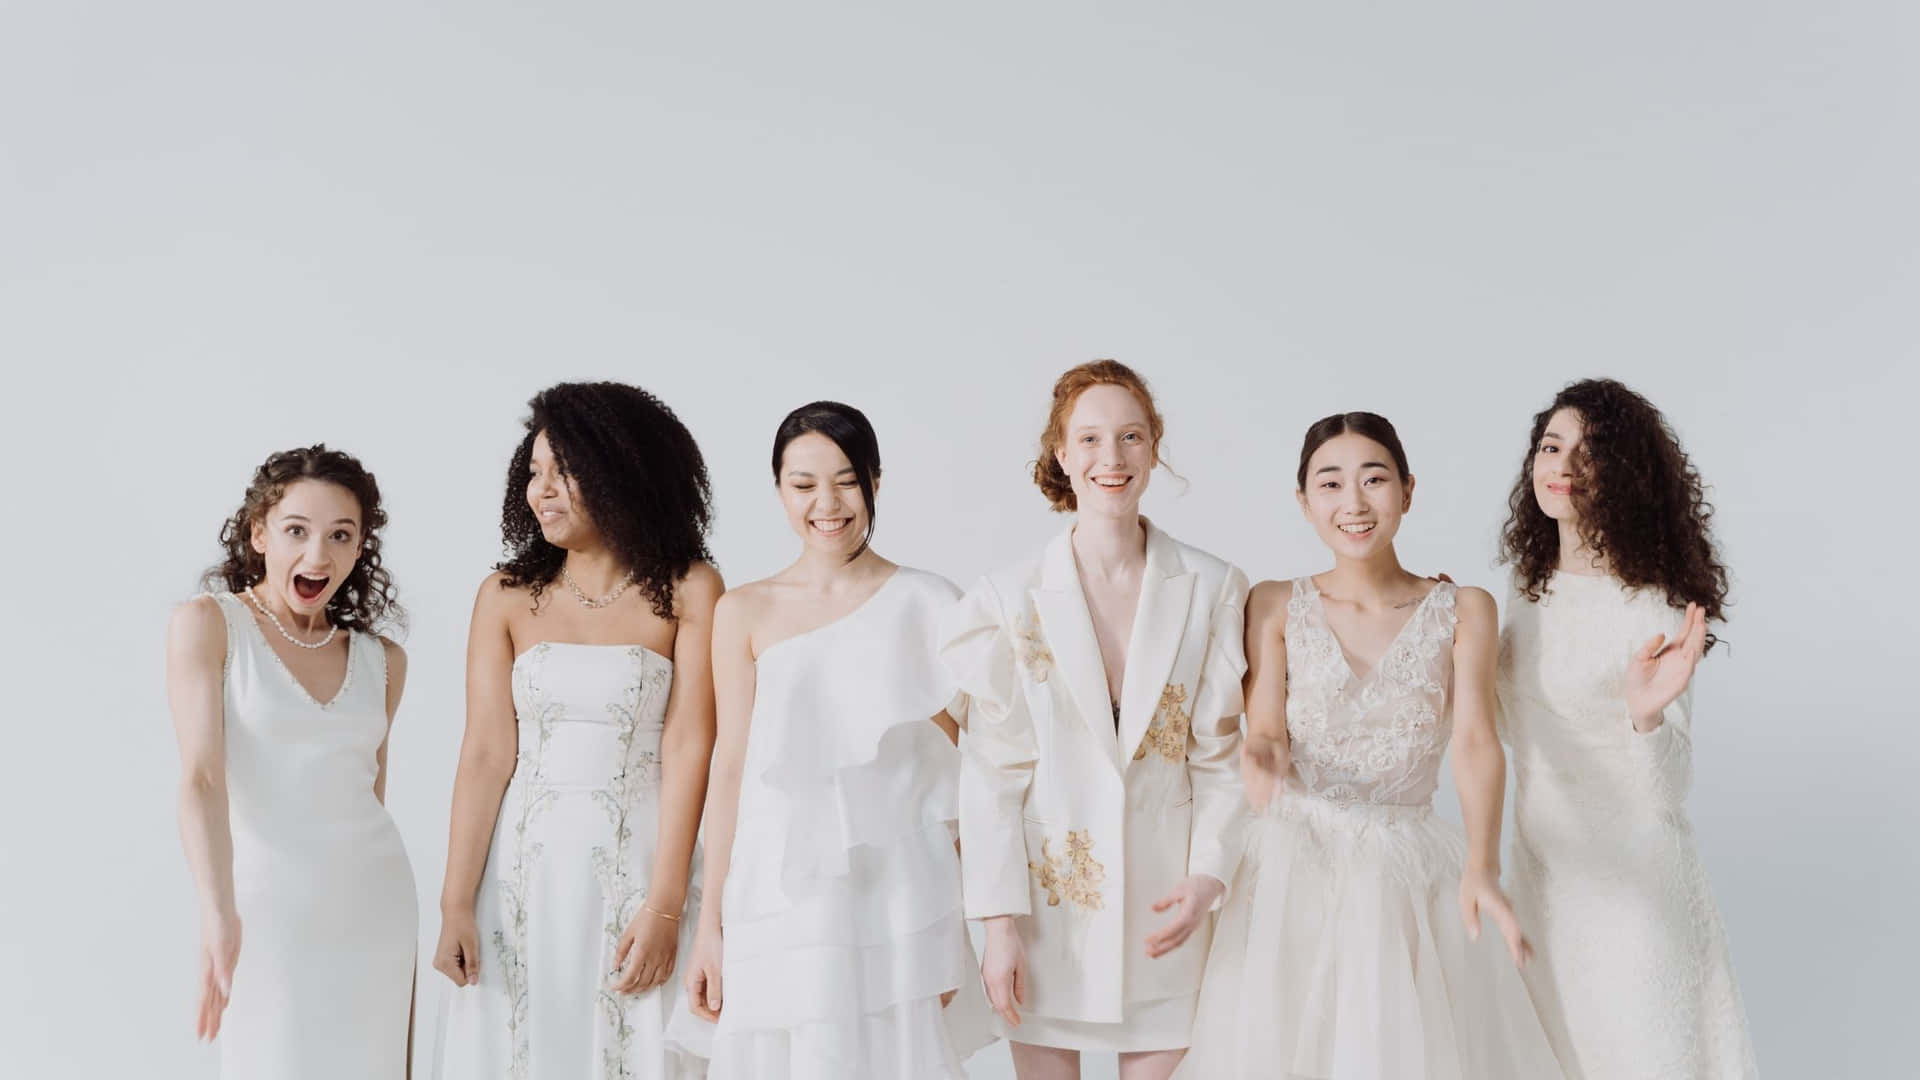 A Group Of Women In White Wedding Dresses